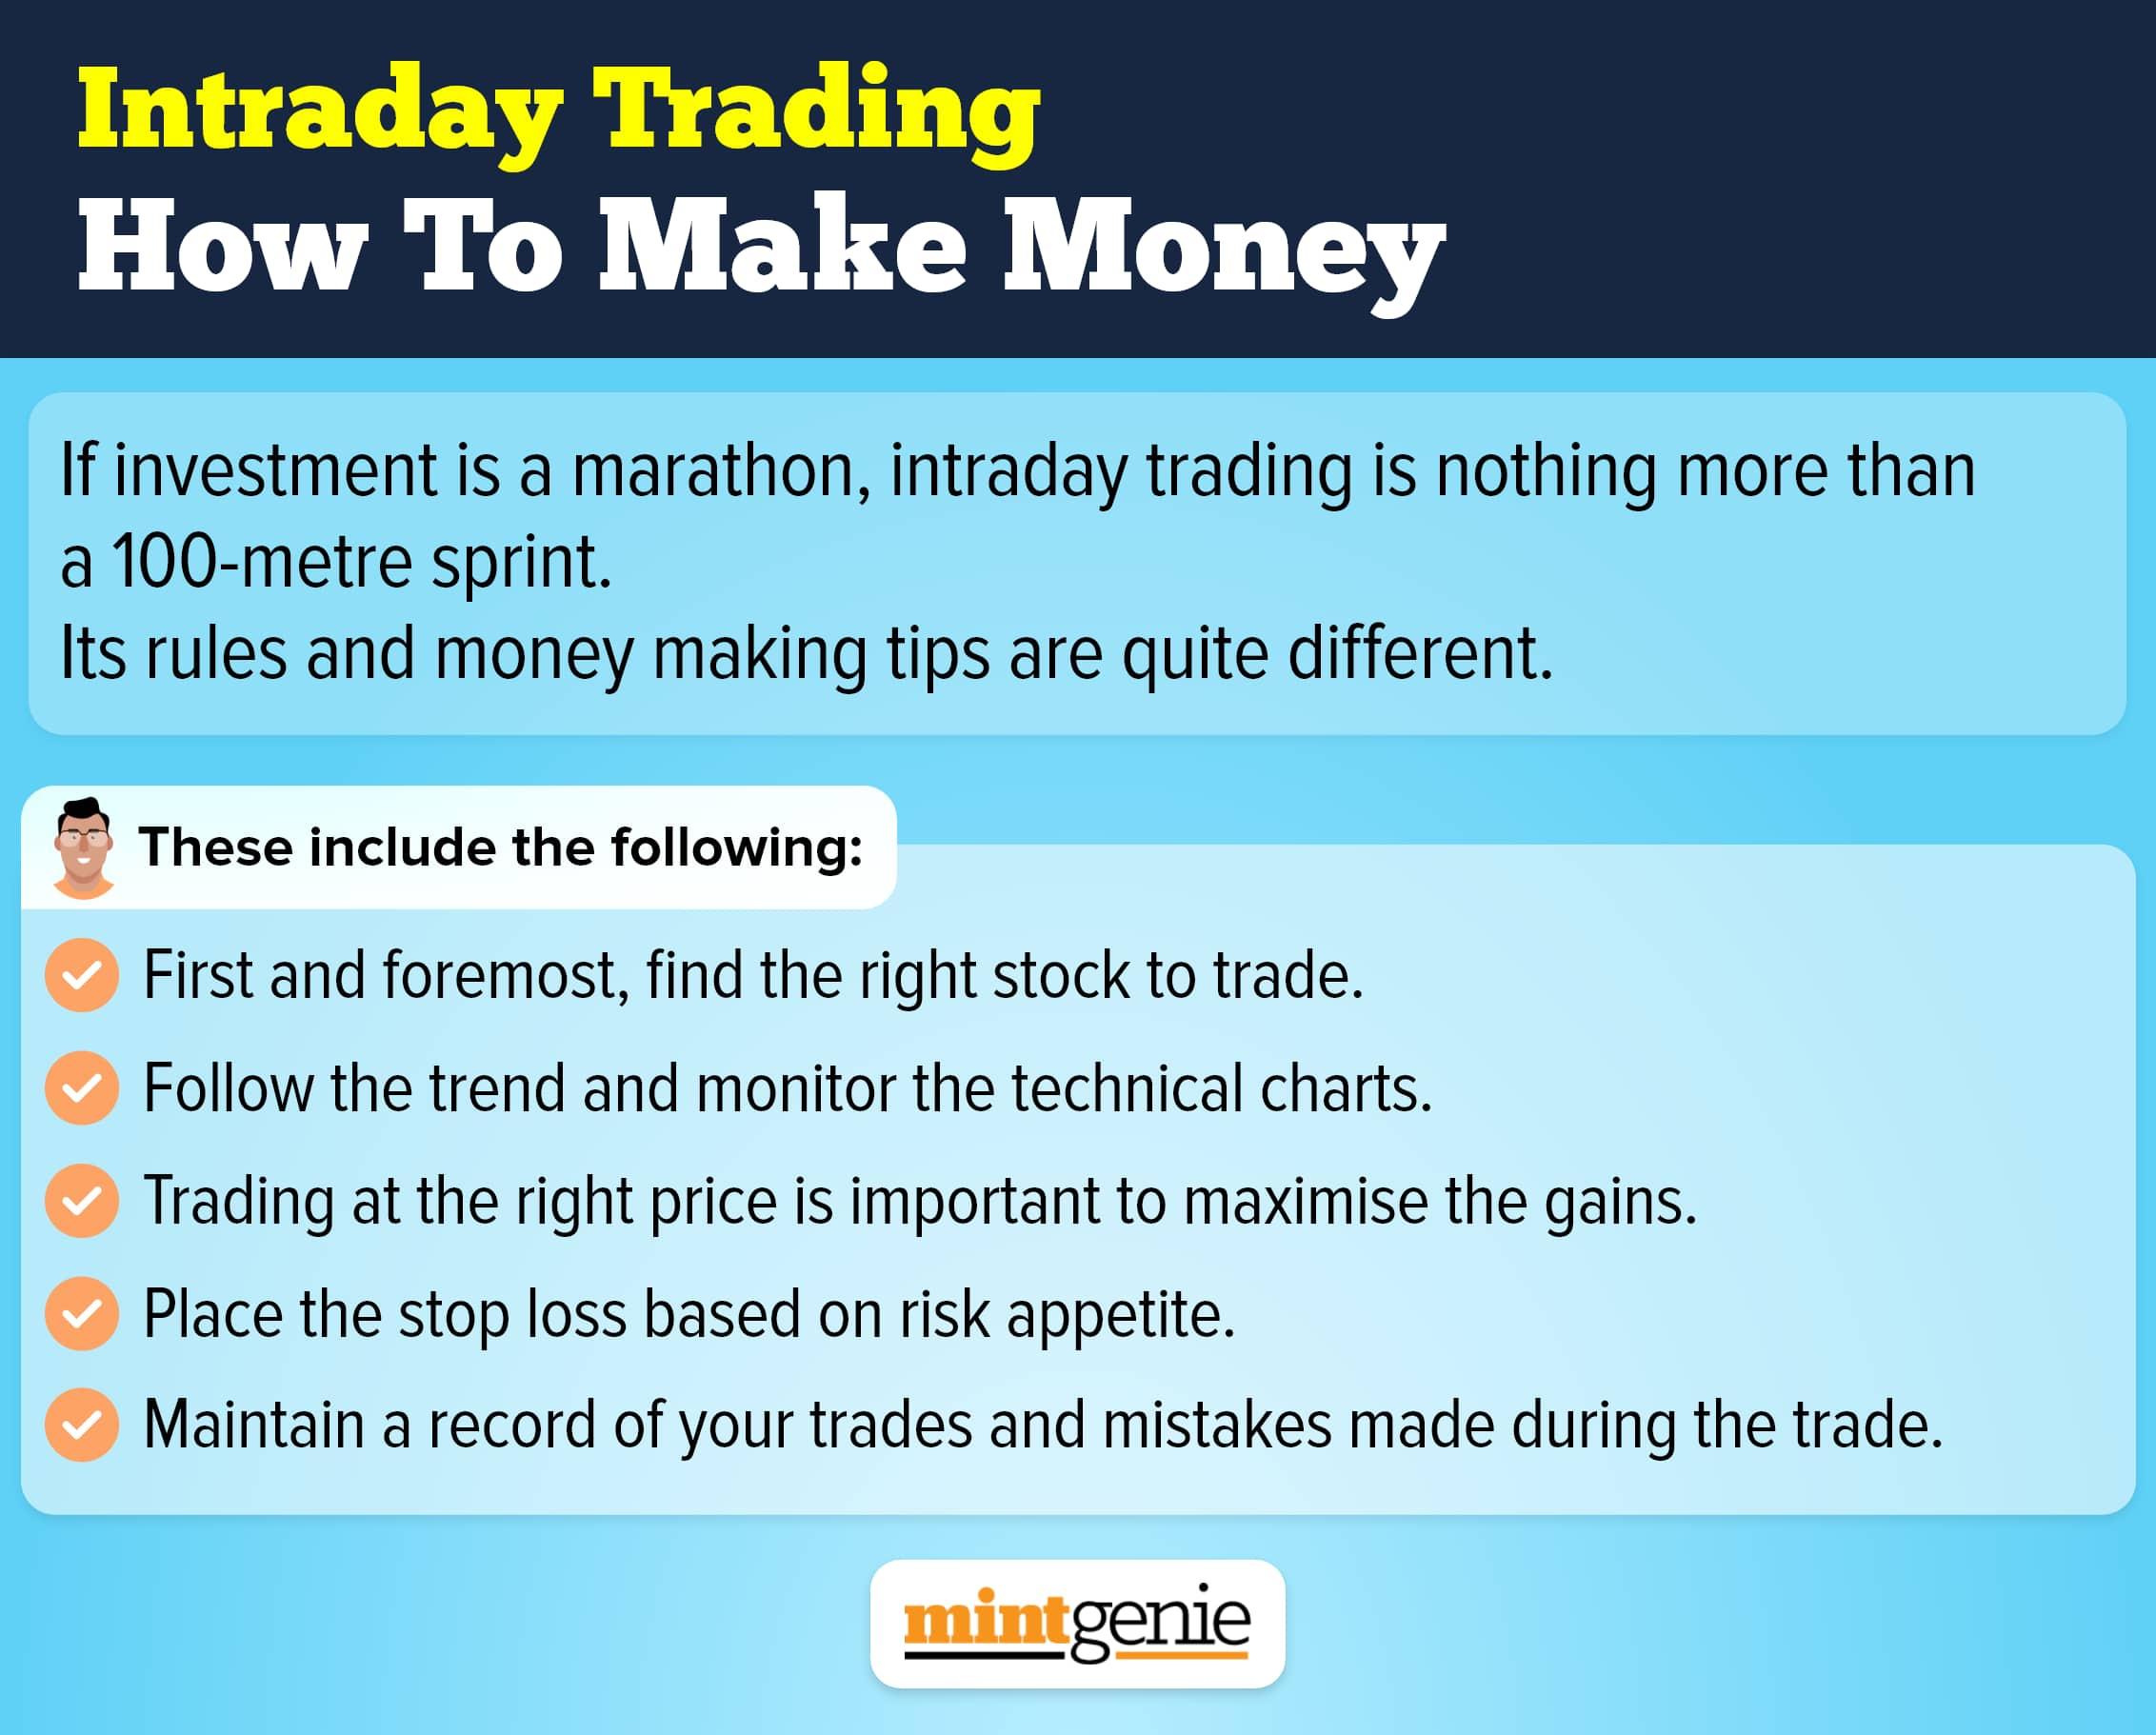 Intraday trading: How to make money